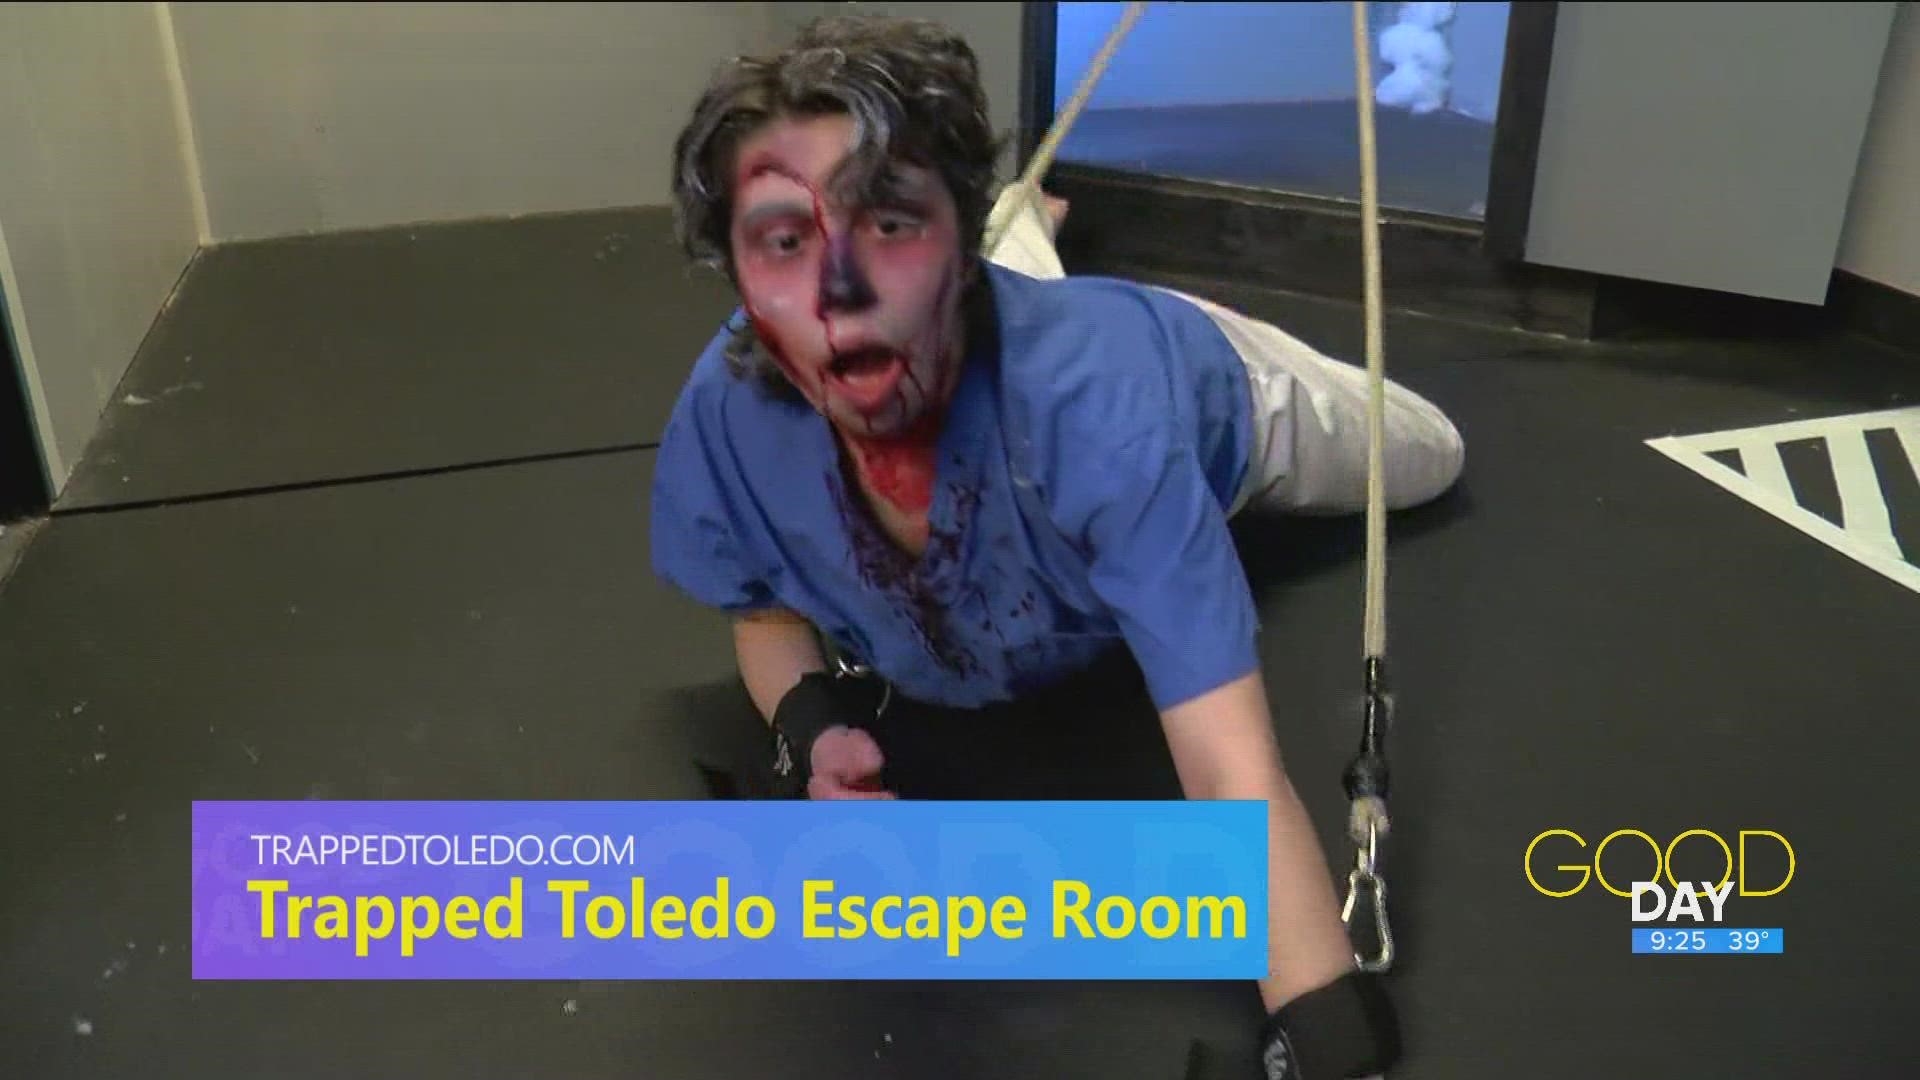 Escape the winter blues with Trapped Toledo and try your hand at escape rooms.